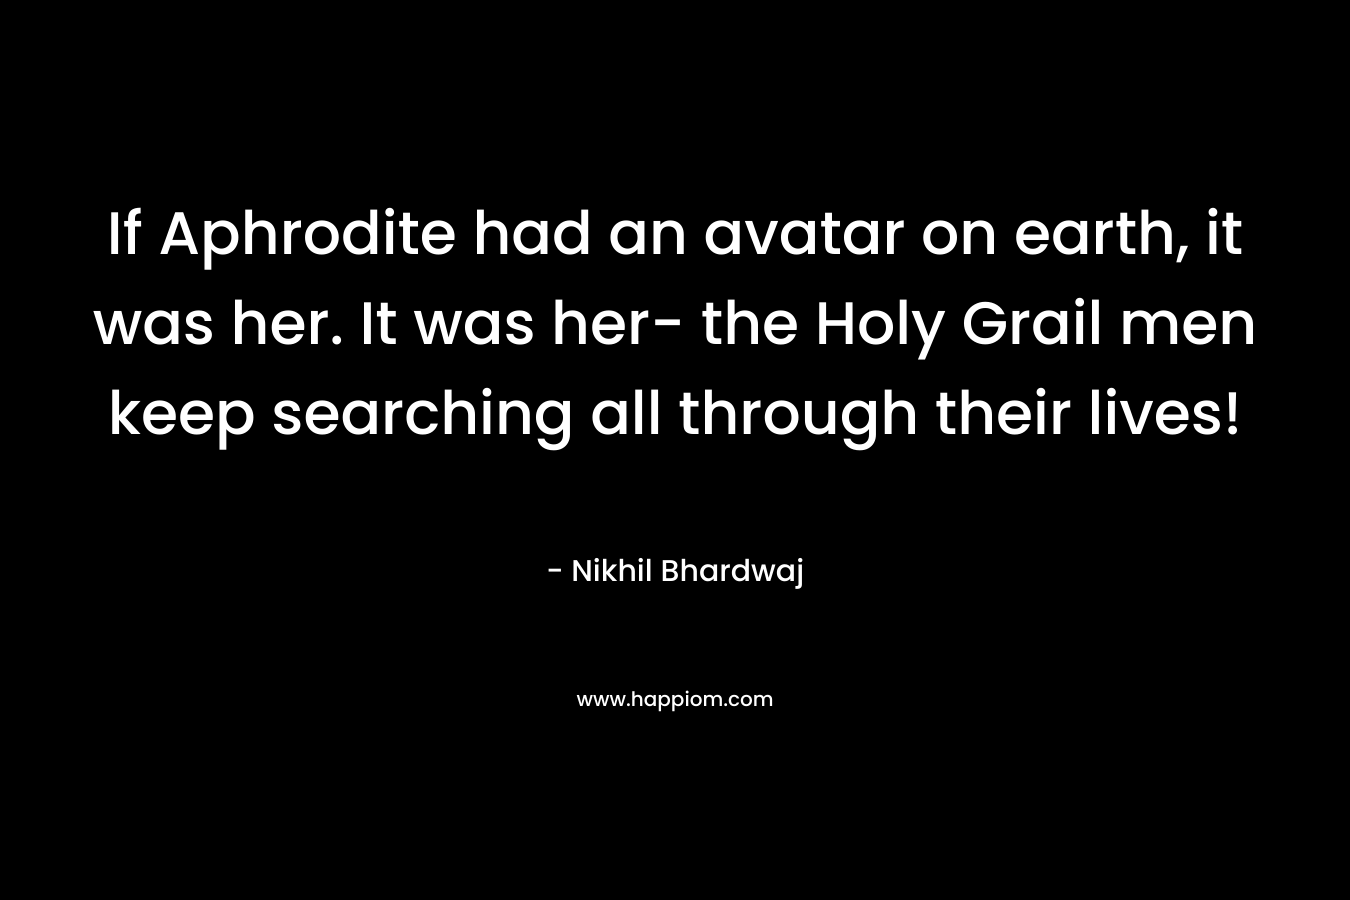 If Aphrodite had an avatar on earth, it was her. It was her- the Holy Grail men keep searching all through their lives! – Nikhil Bhardwaj